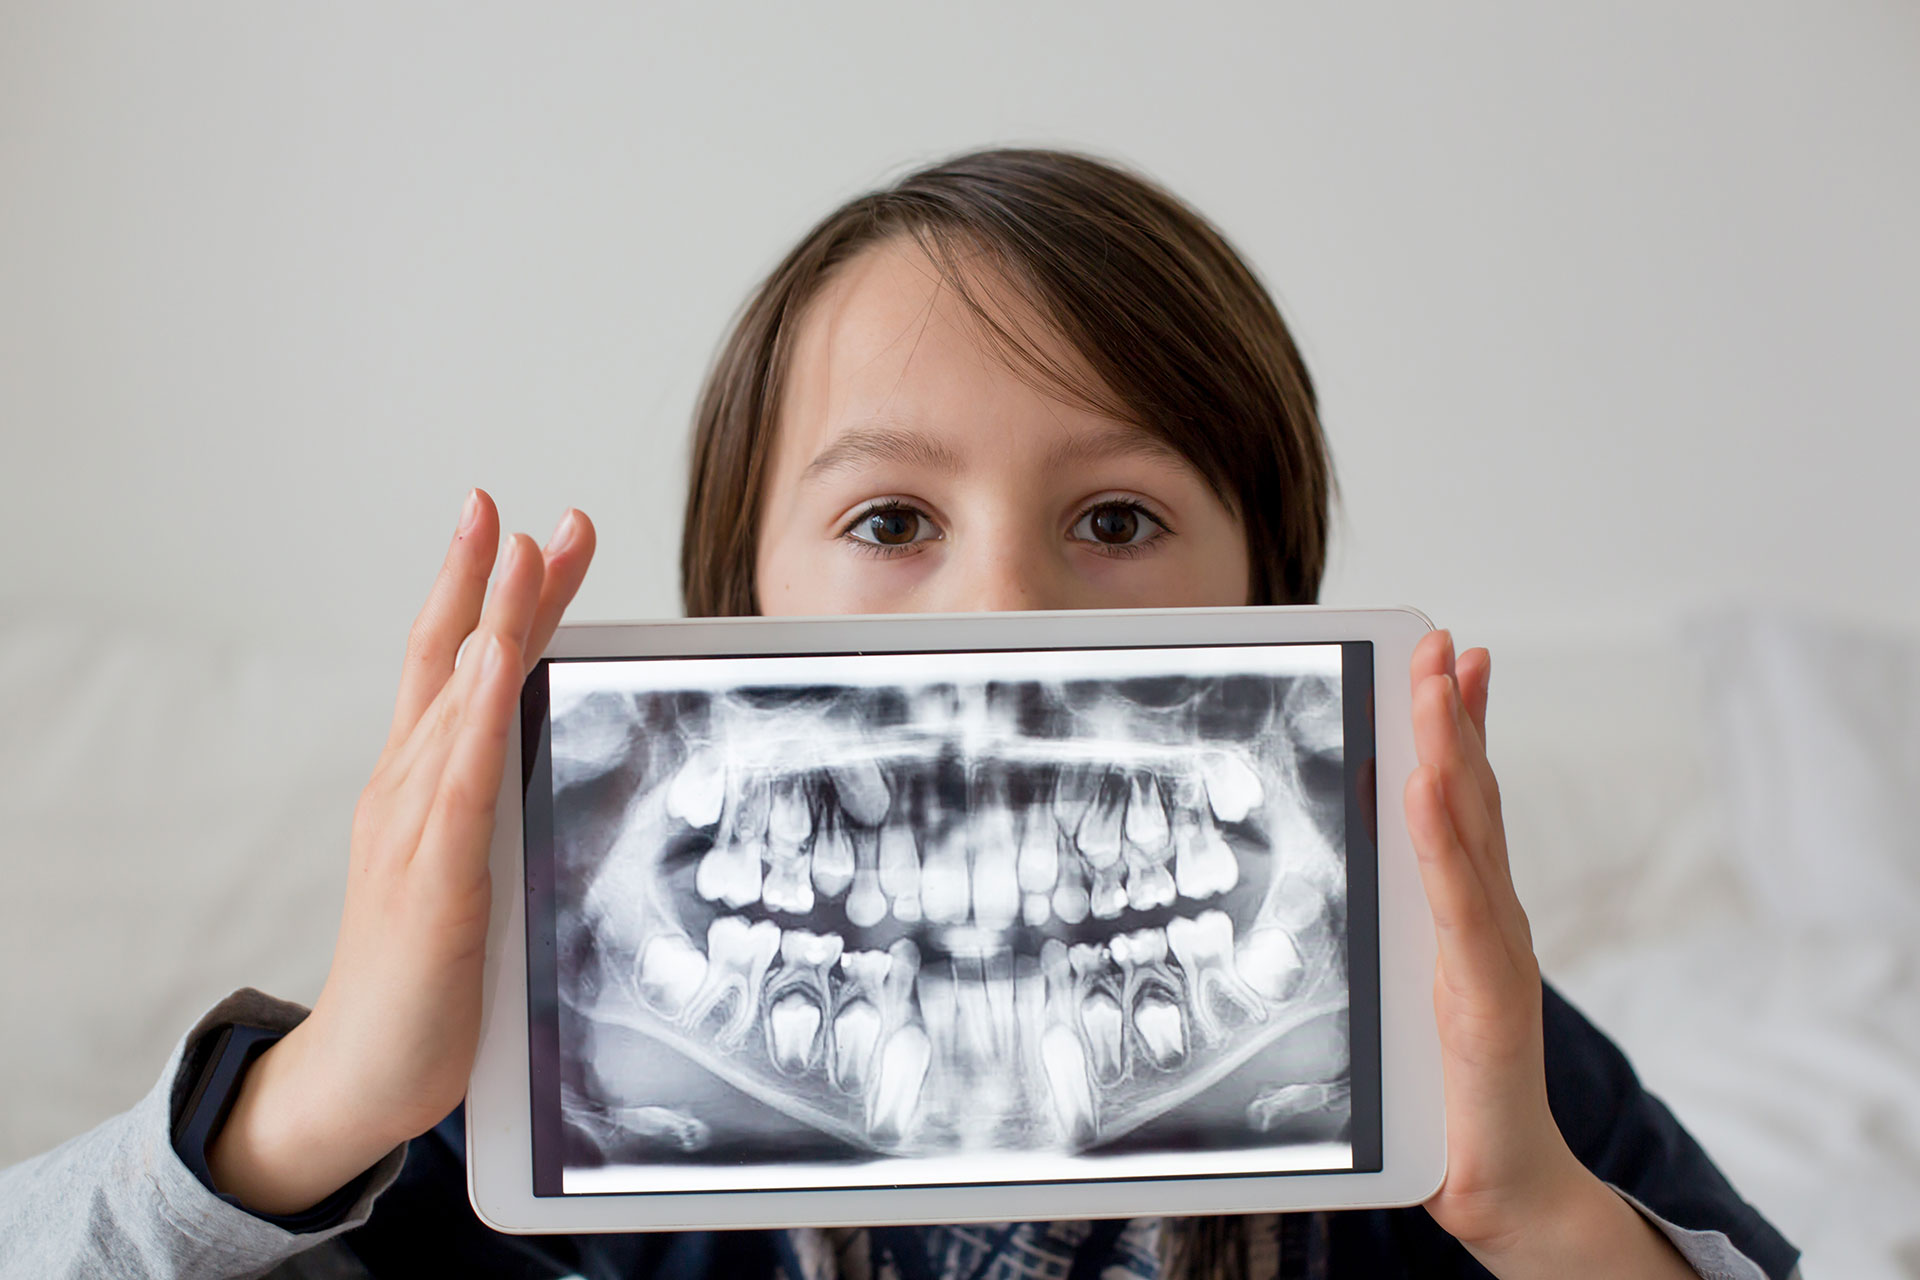 A young child holding a tablet displaying an X-ray of their teeth, with the child s face partially obscured by the tablet.